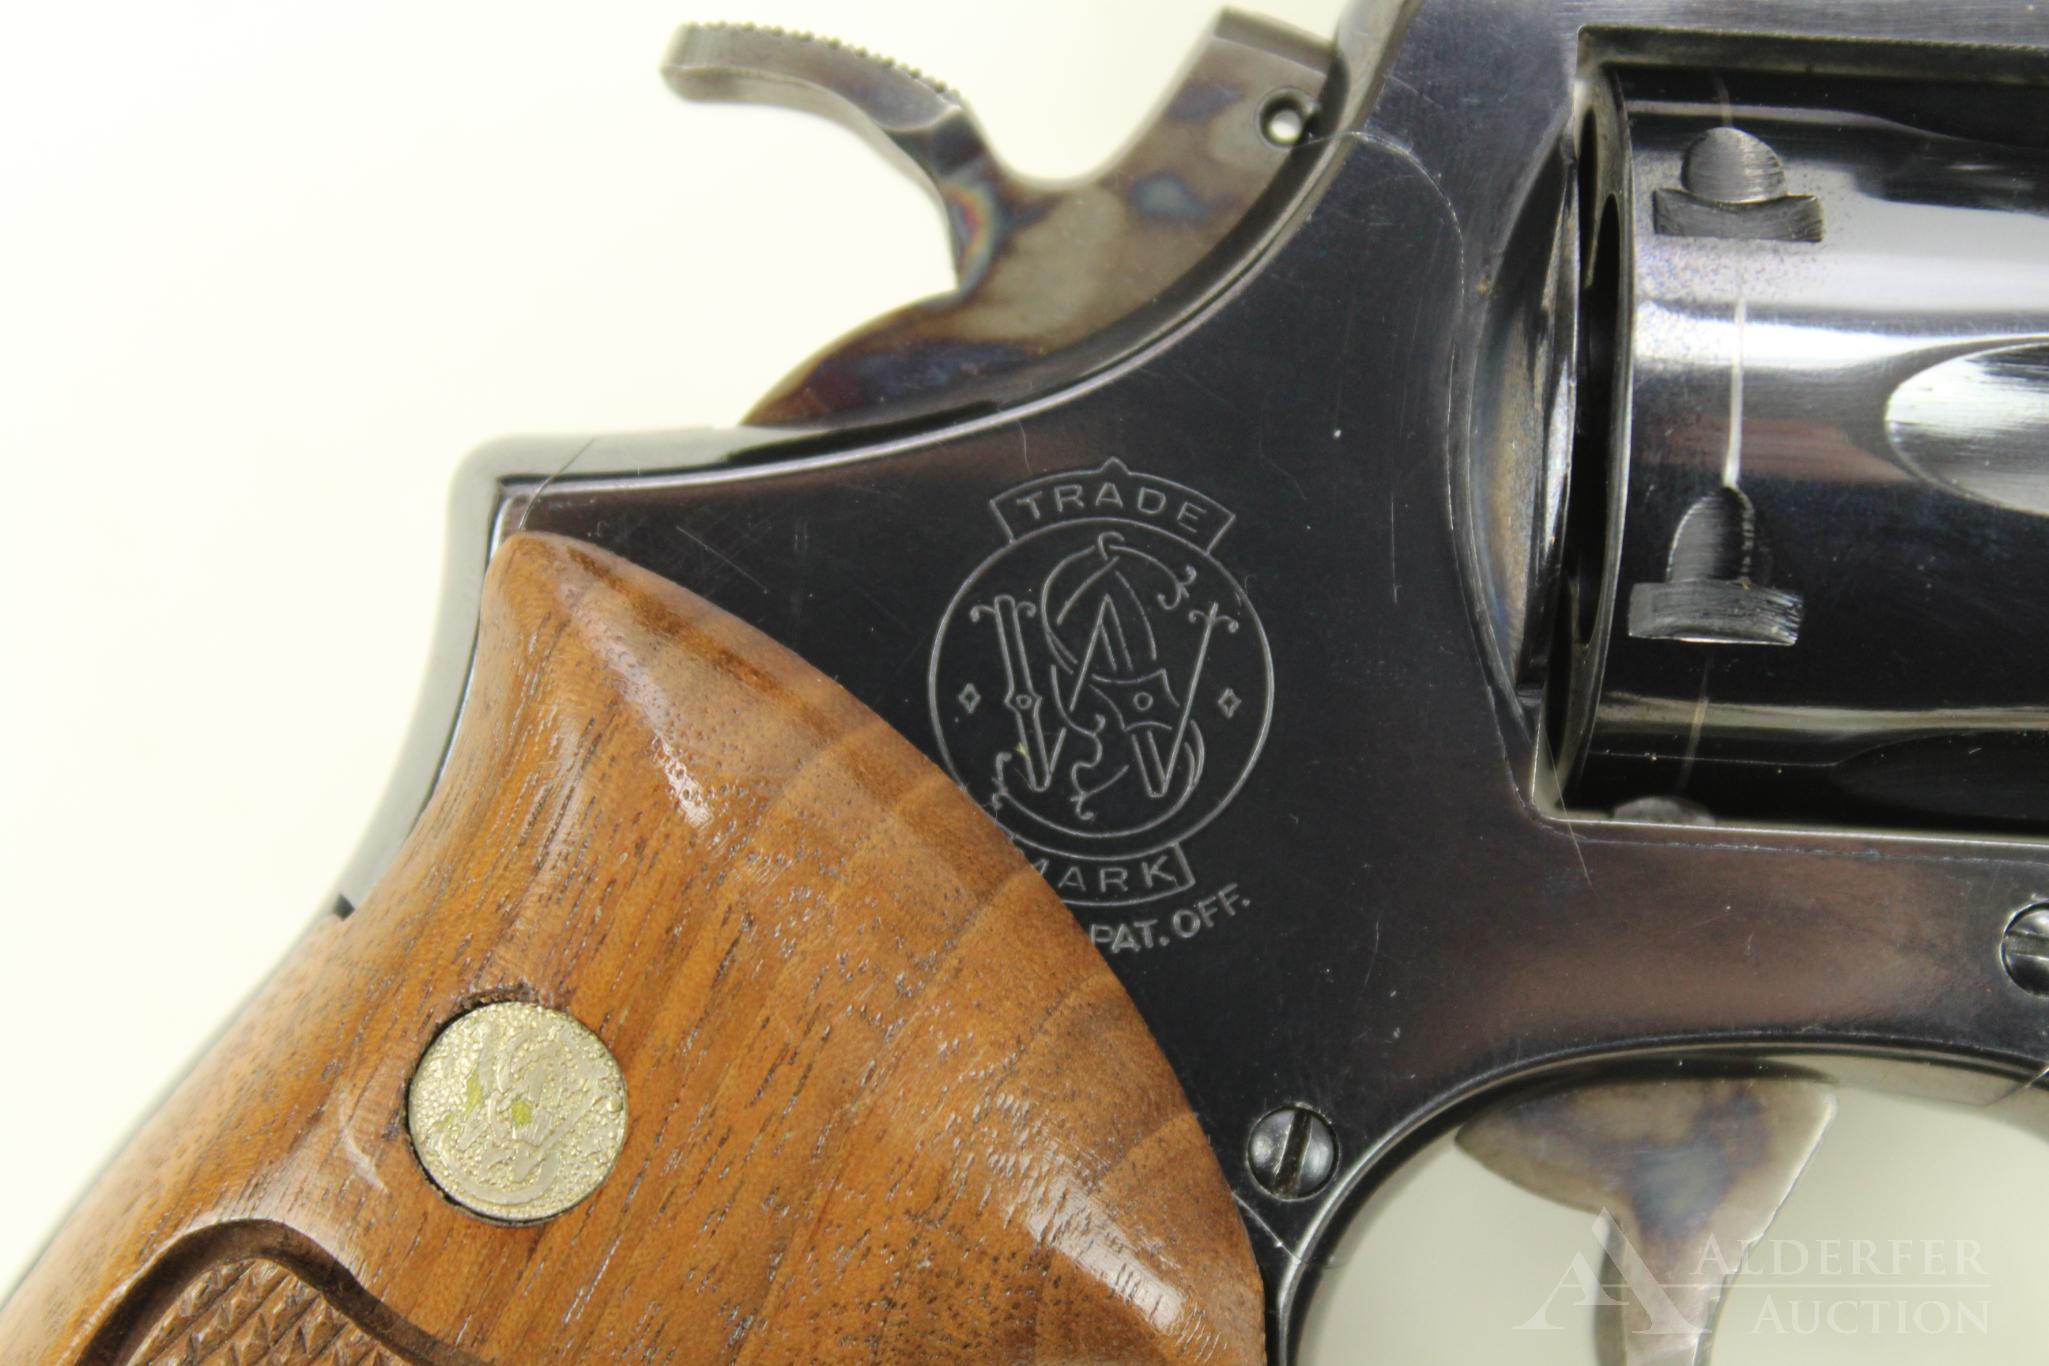 Smith & Wesson 10-8 double action revolver.